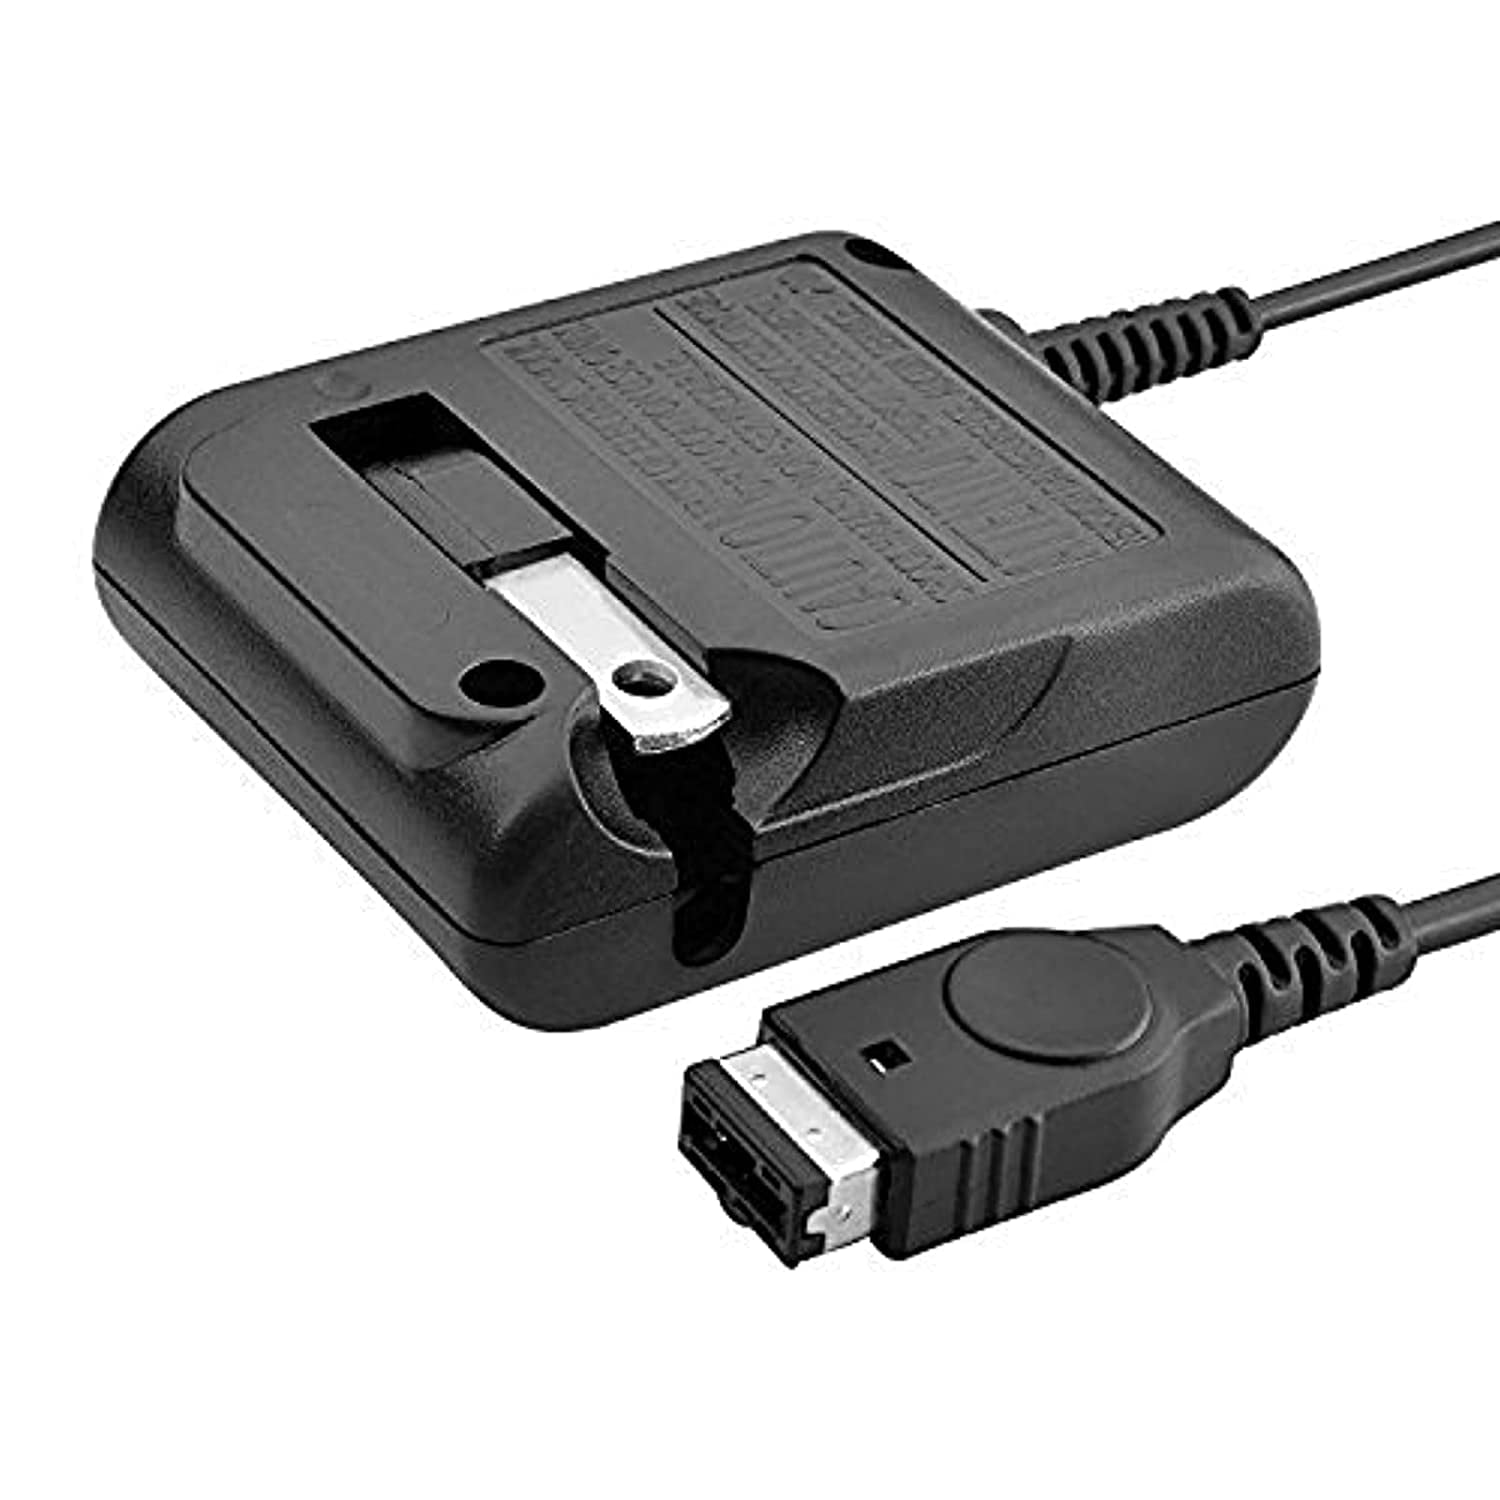 Power Adapter For Original Ds And Gba Gameboy Advance Sp Wall Charger By Mars Devices Walmart Com